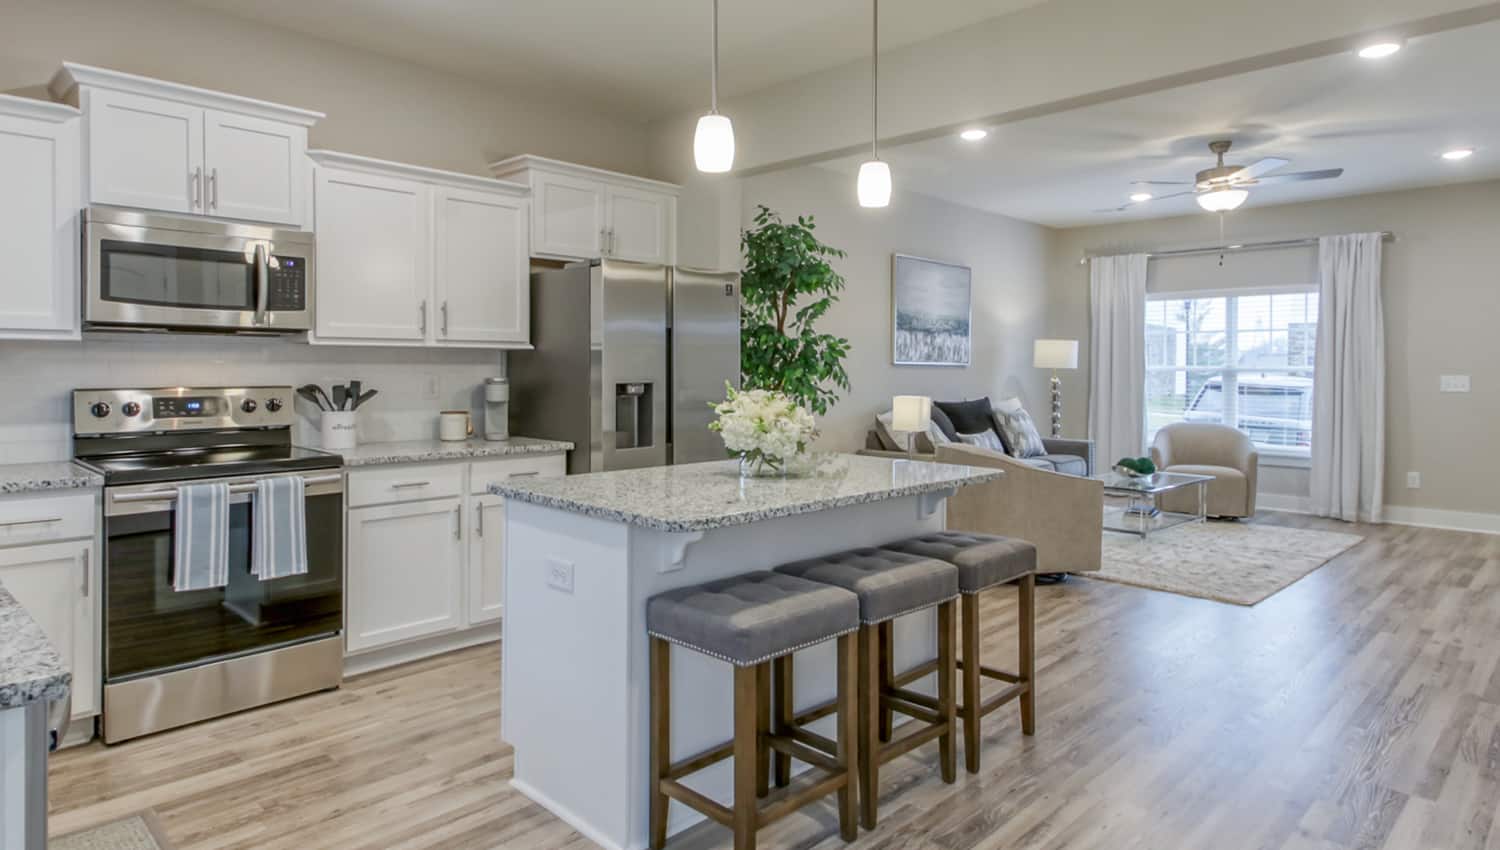 Interior view of Vastland Communities townhome kitchen with an island